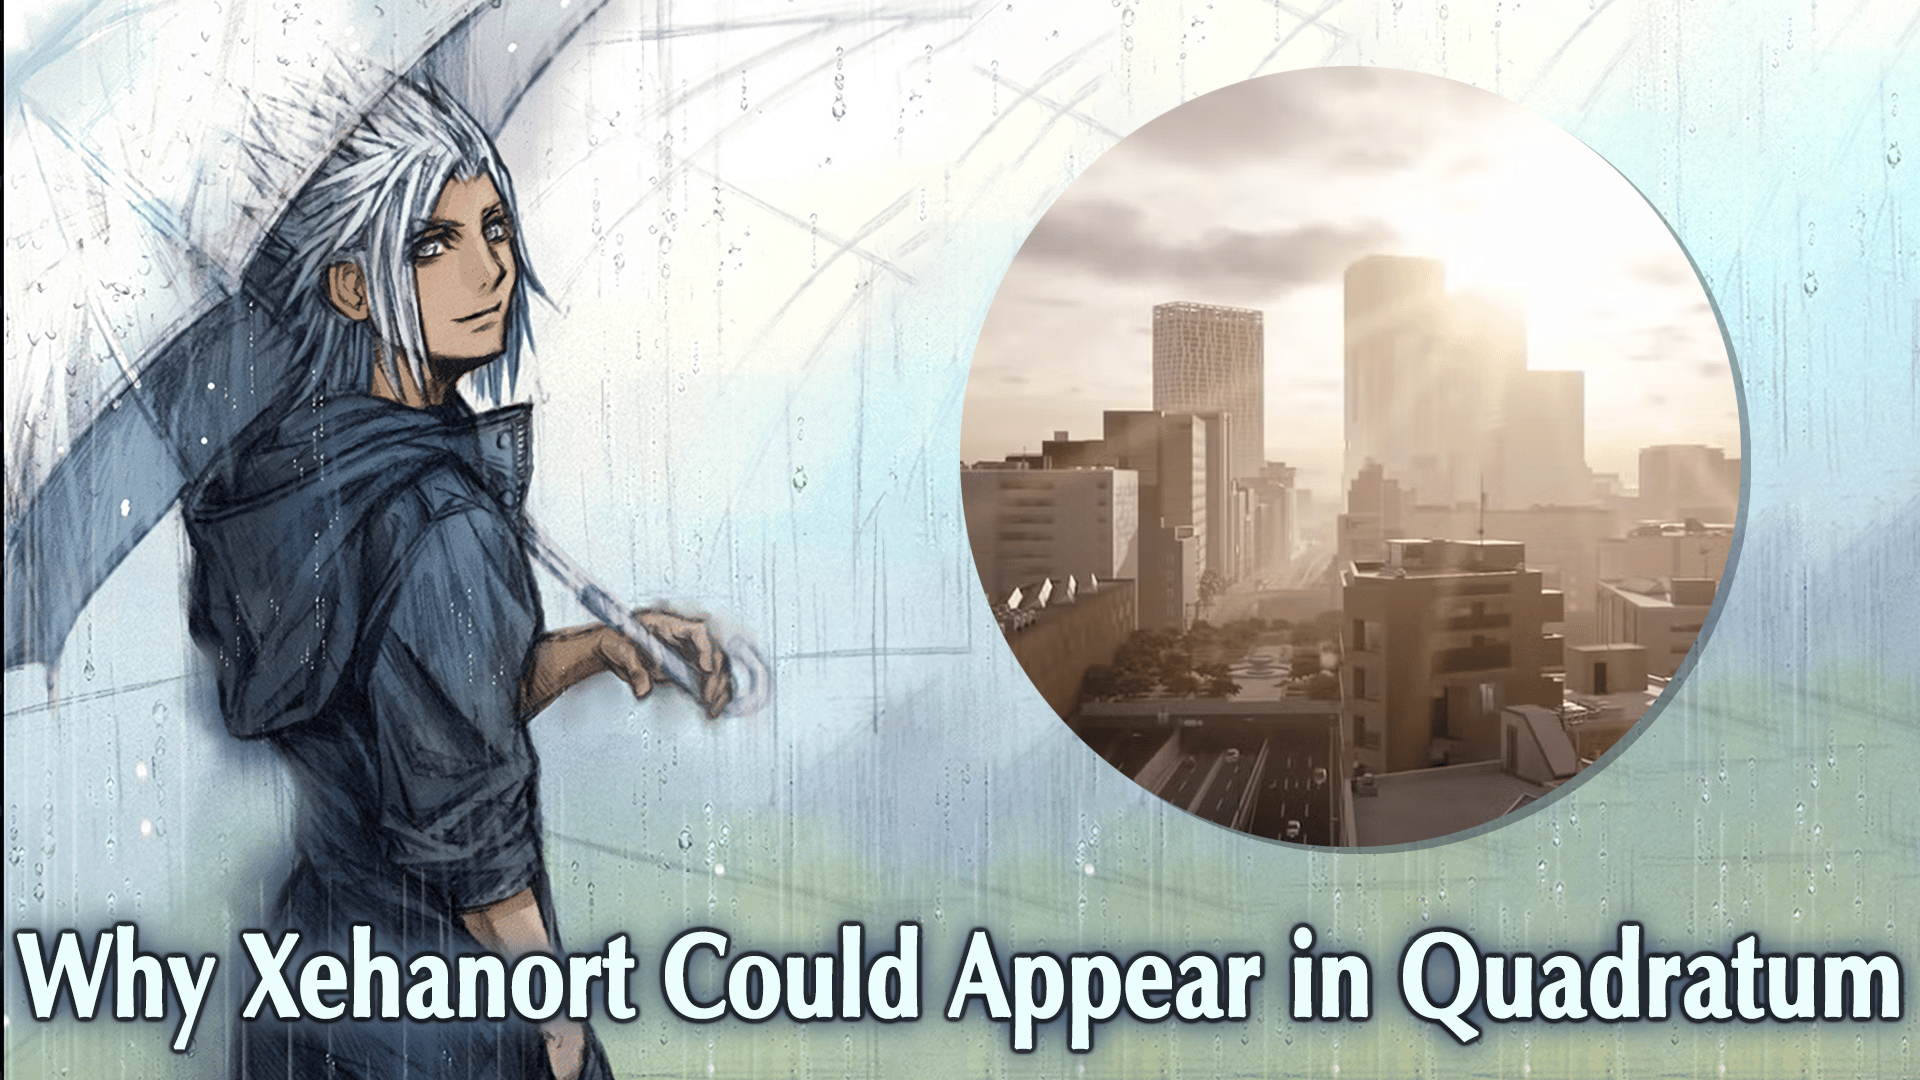 Why Kingdom Hearts’ Xehanort Could Appear in Quadratum